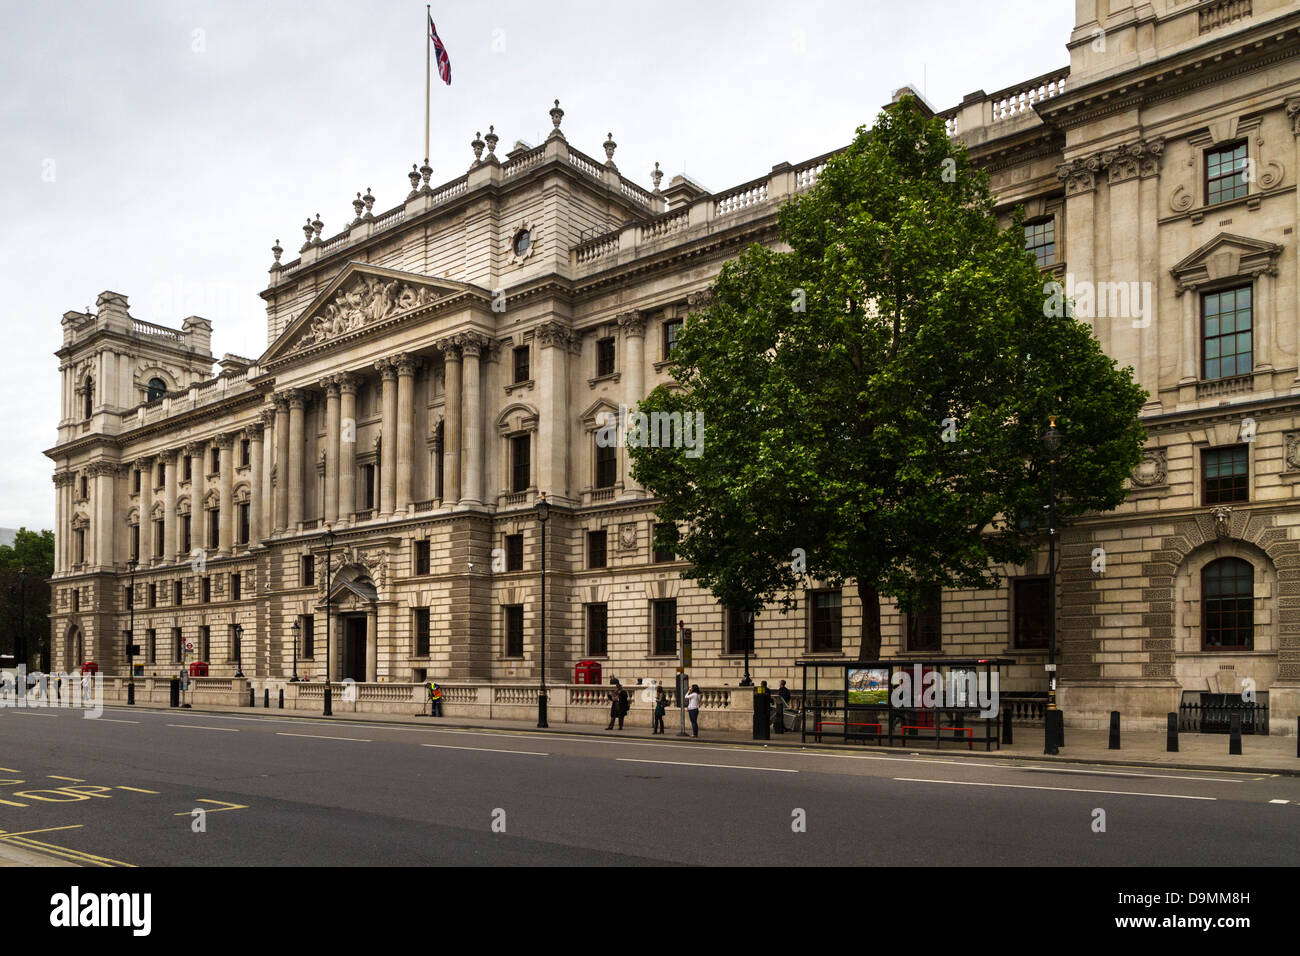 Offices of Department of Culture, Media & Sport and the Inland Revenue and Customs, Whitehall, London, UK Stock Photo